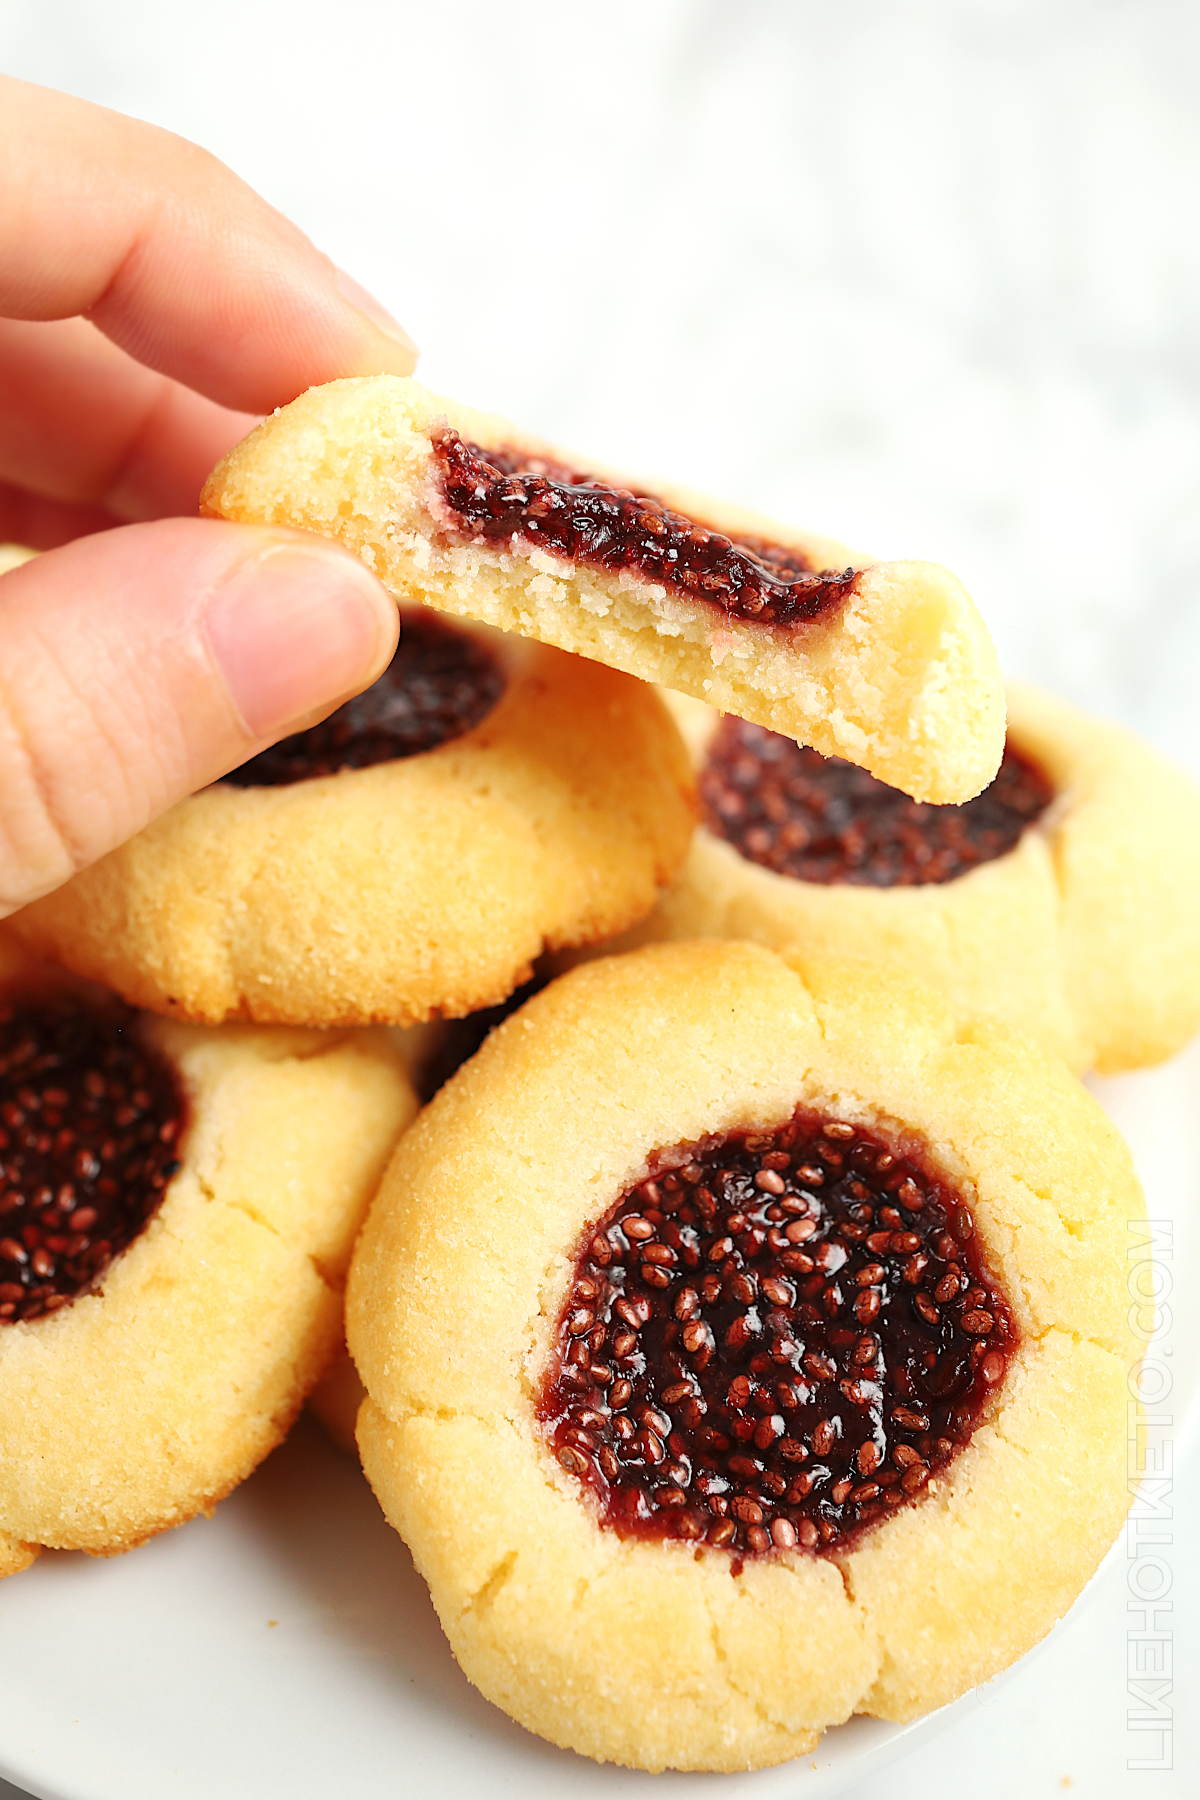 Half bitten berry chia jam thumbprint cookie, with buttery crumbs, over a plate with more thumbprint cookies piled up.